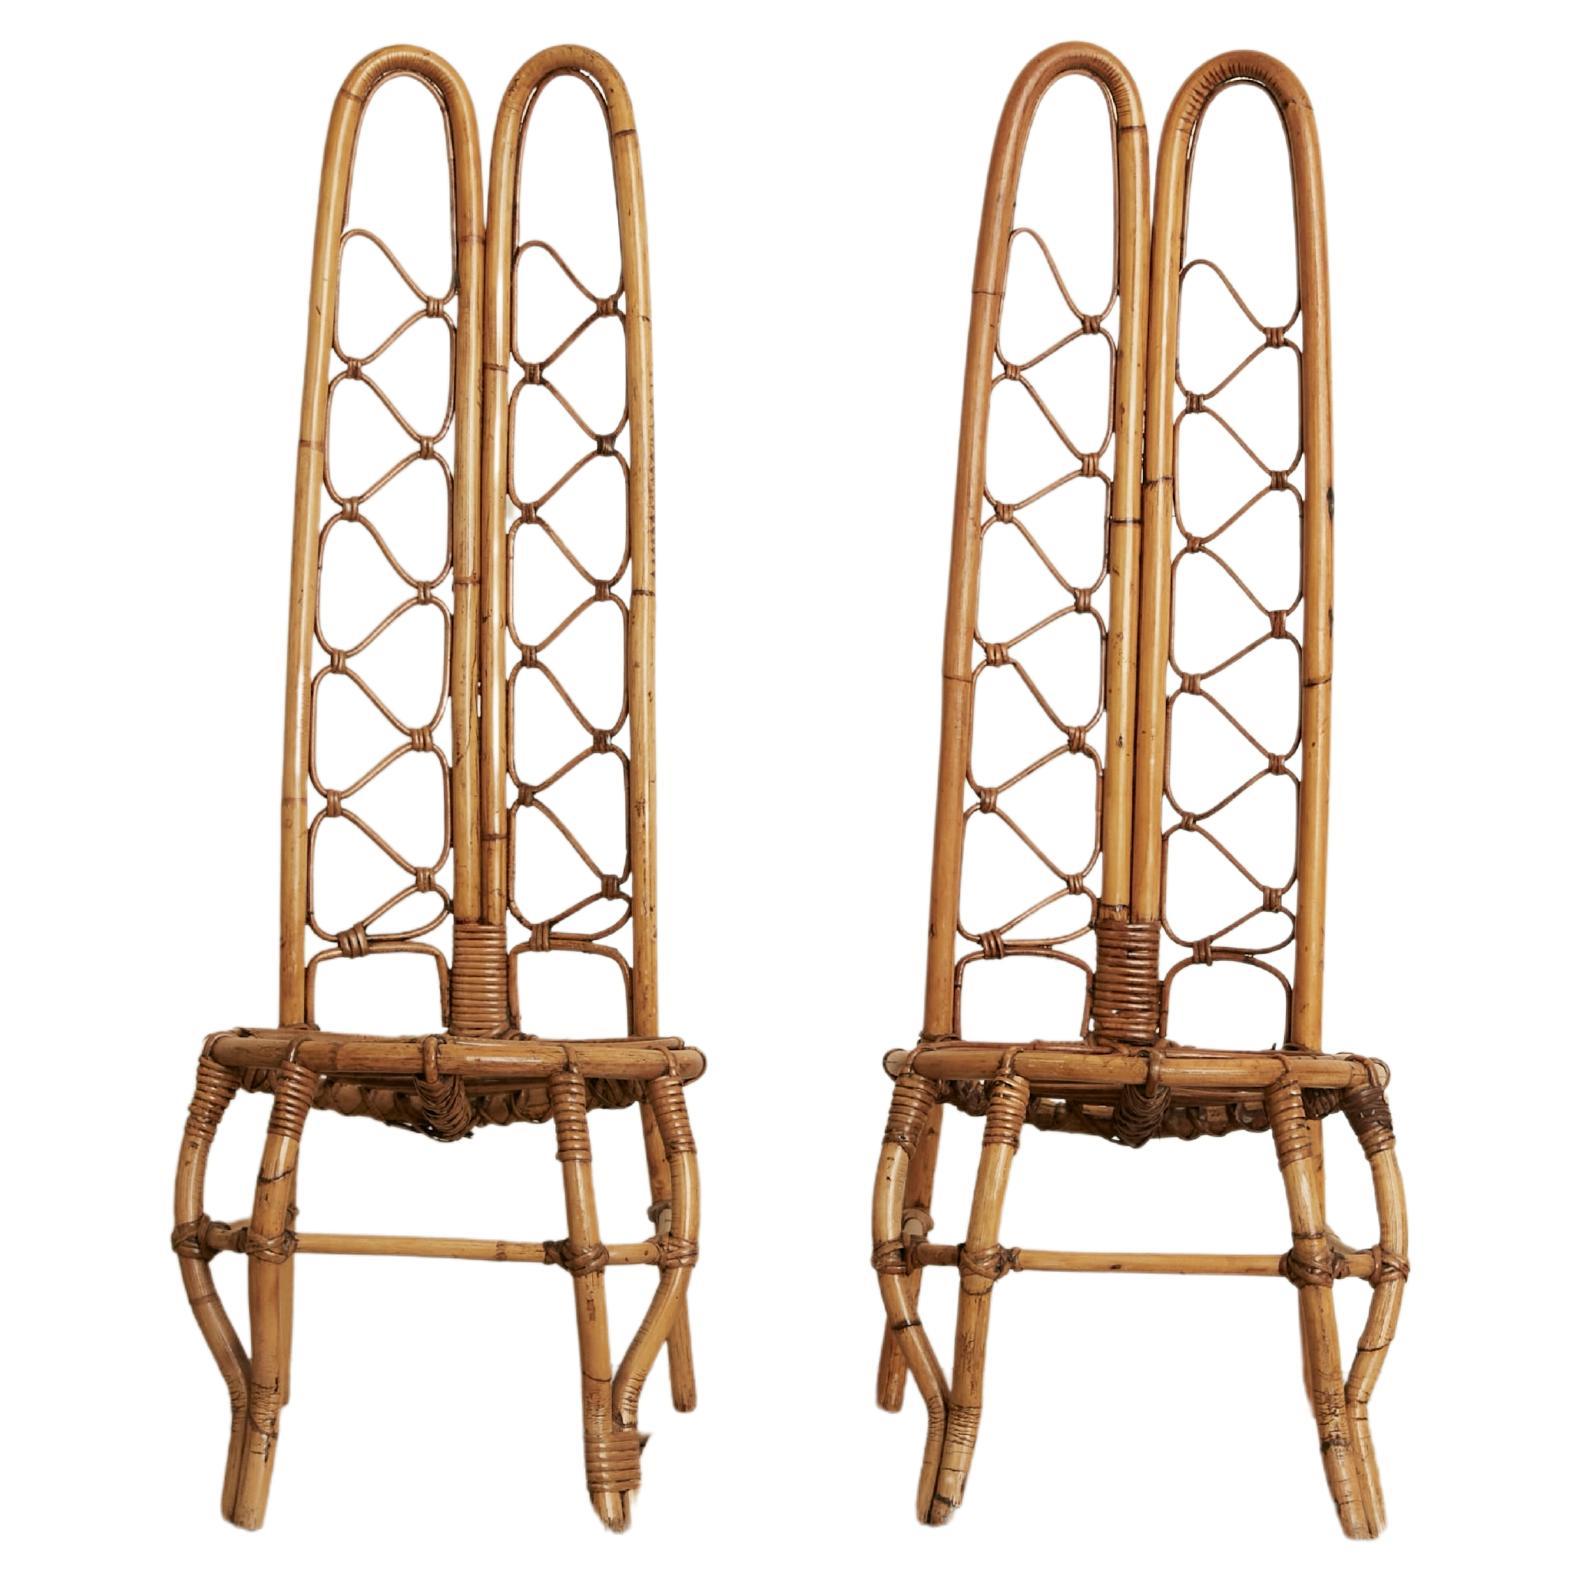 Bamboo Riviera chairs from the 60's, Dirk Van Sliedrecht models For Sale